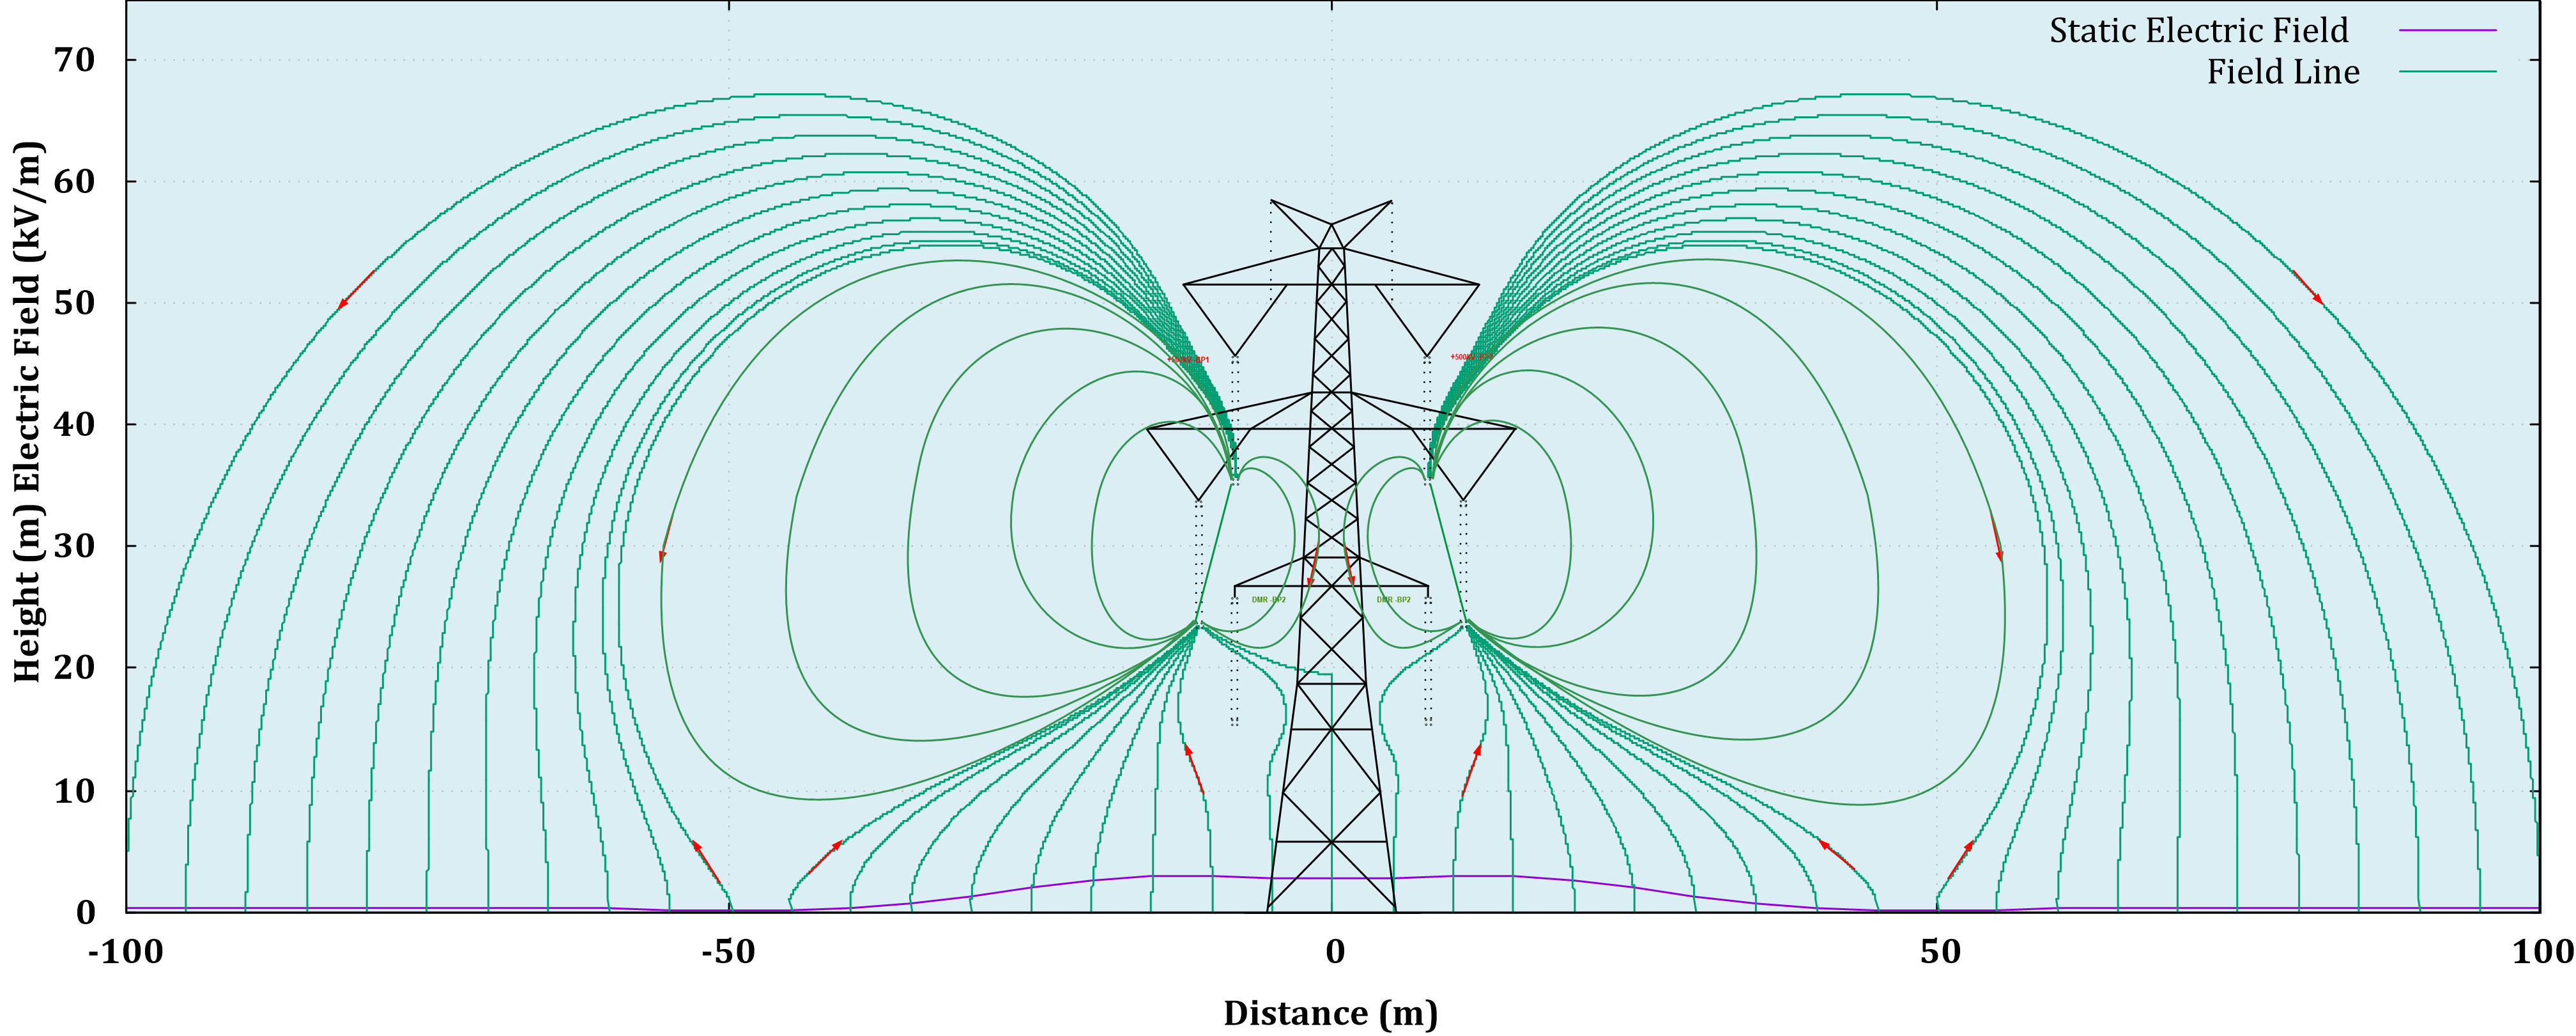 Two Bipole Electric Field Lines Diagram